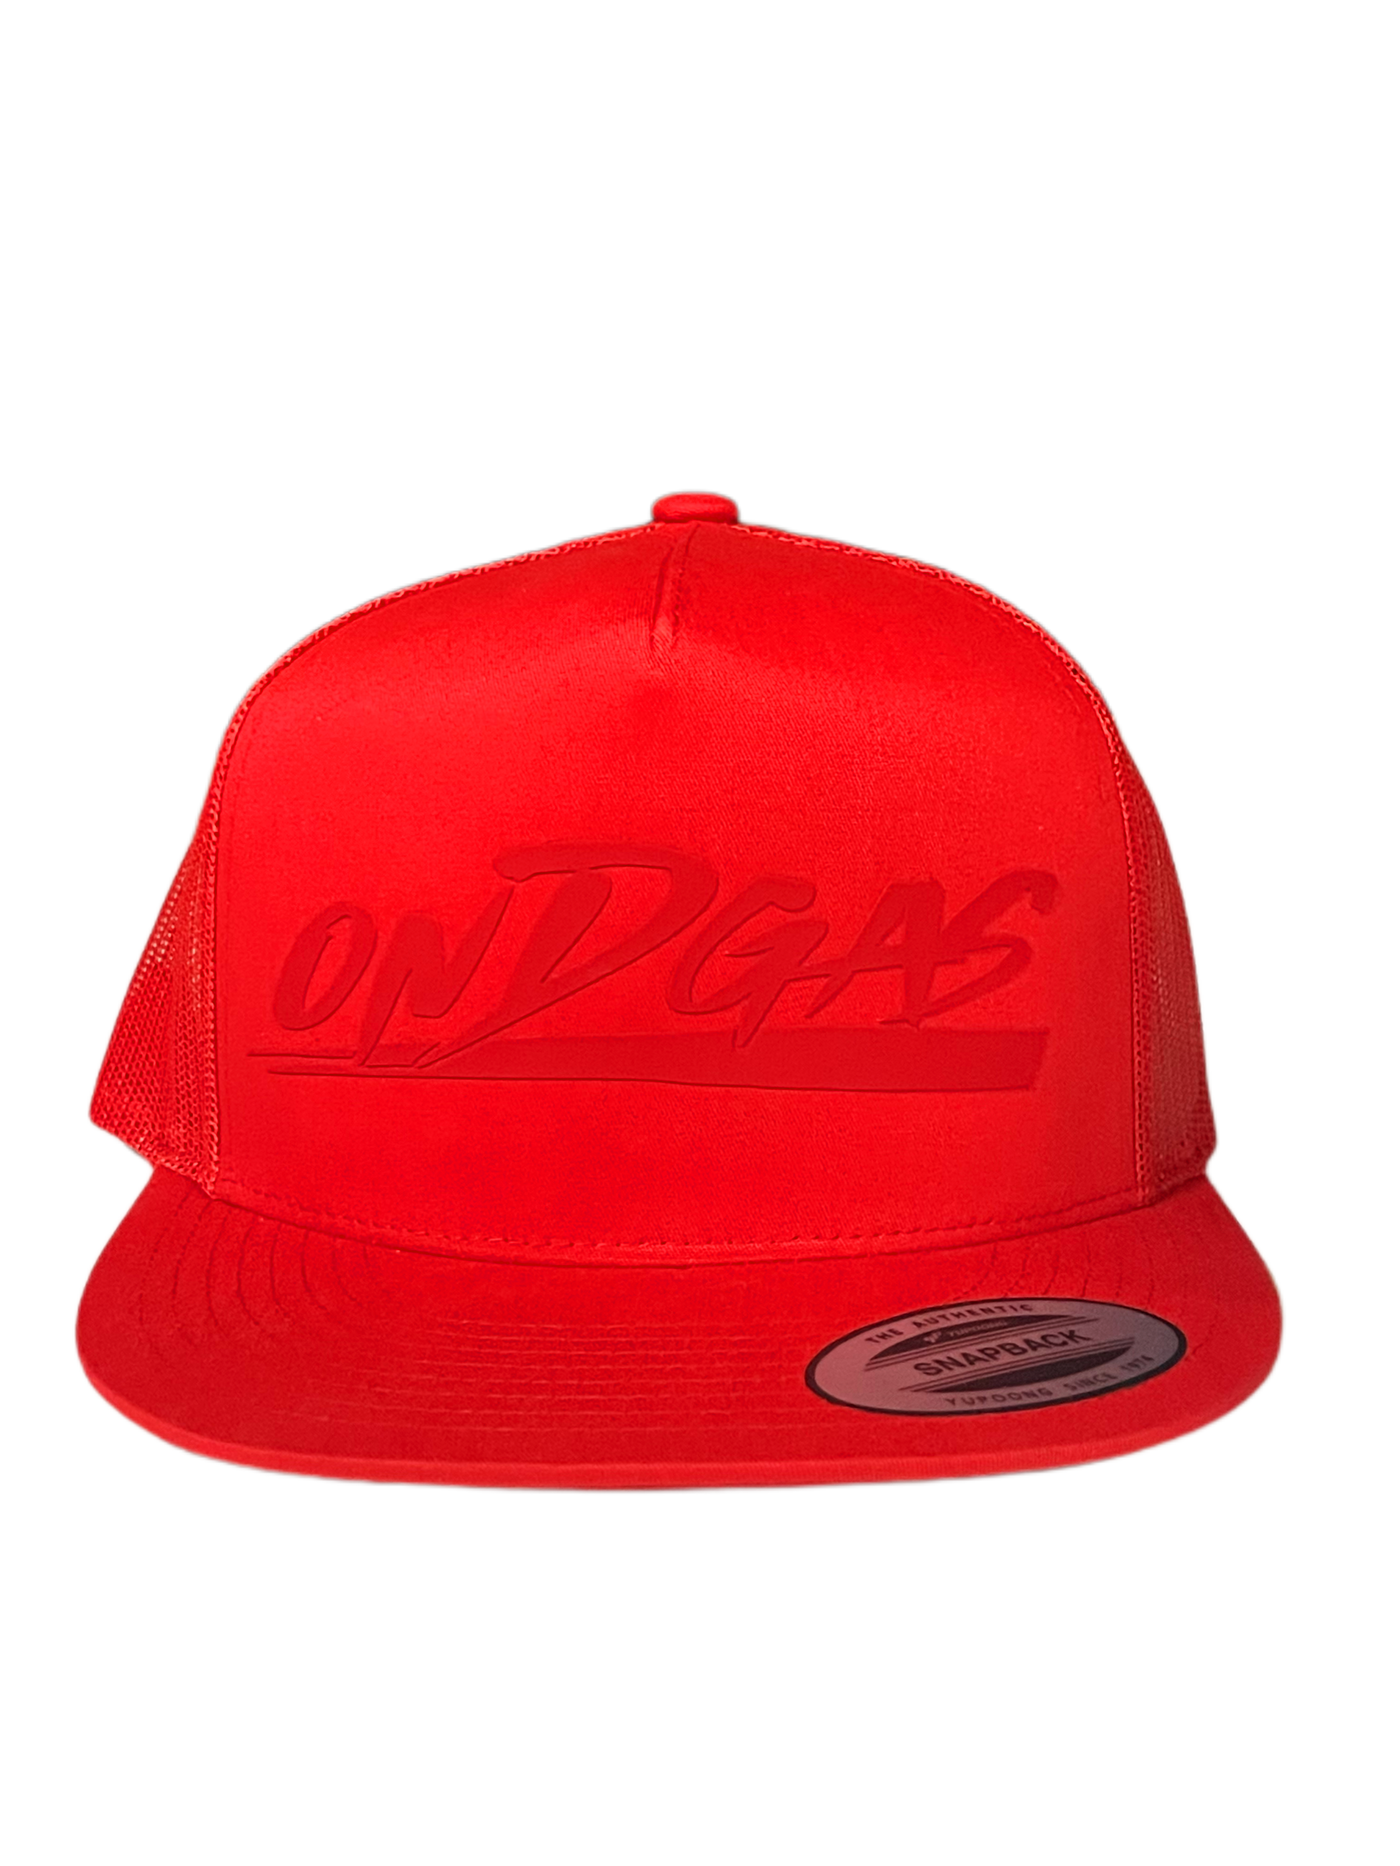 Red on Red ONDGAS Snapback (Red ONDGAS logo)